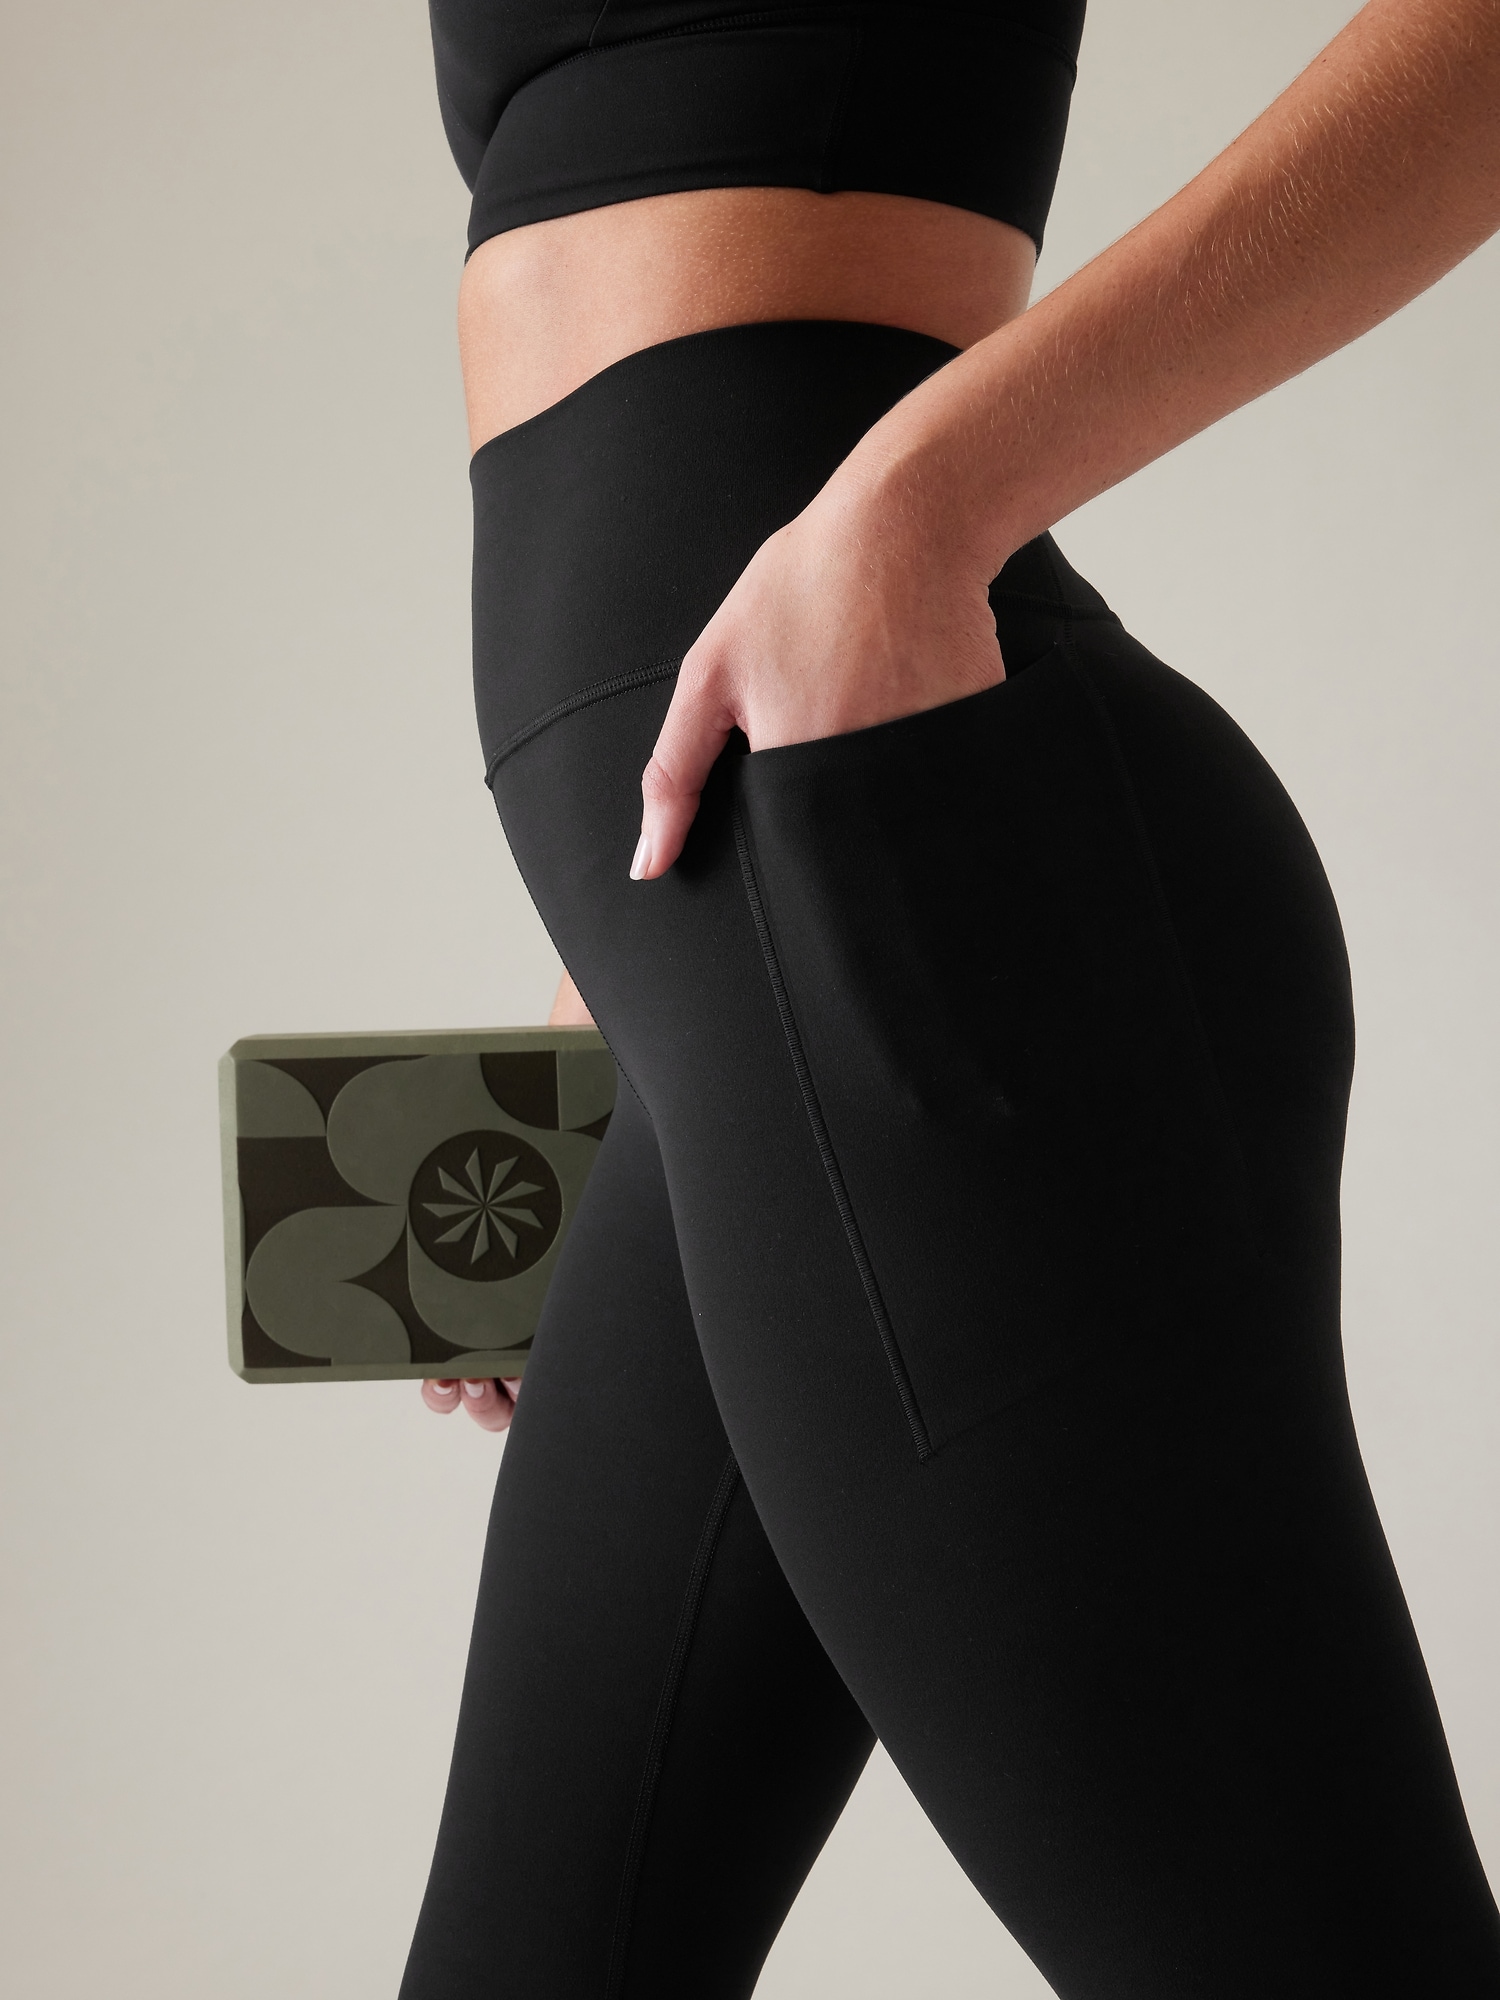 ZUTY 78 Workout Leggings for Women High Waisted Leggings with